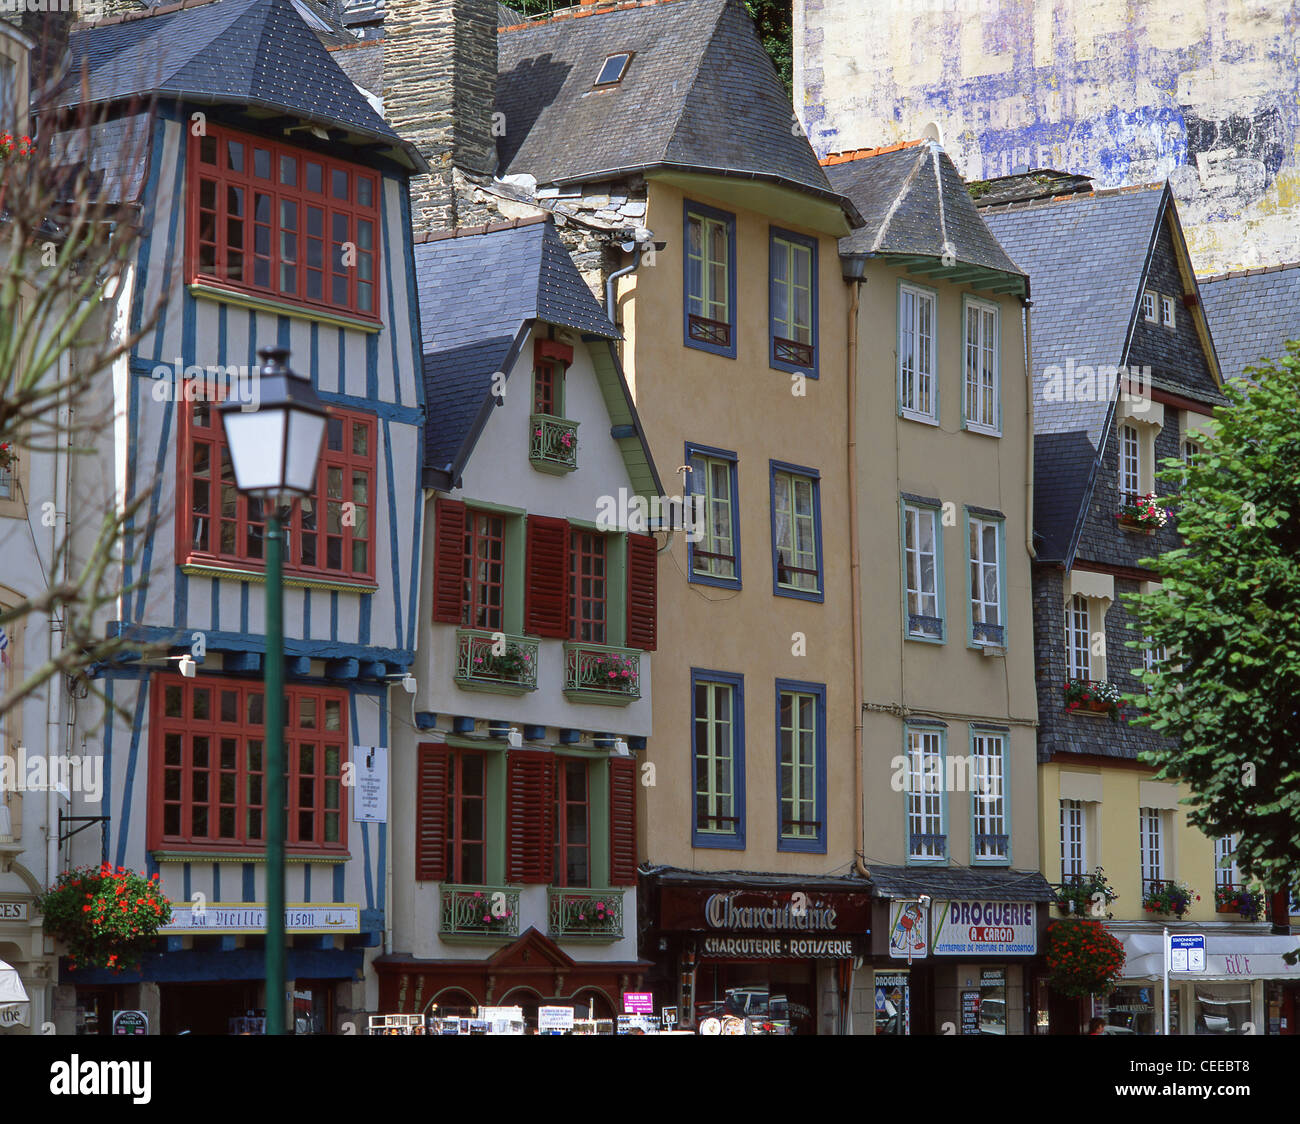 XVII century lantern houses, Place Otages, Morlaix, Finistère, Brittany, France Stock Photo